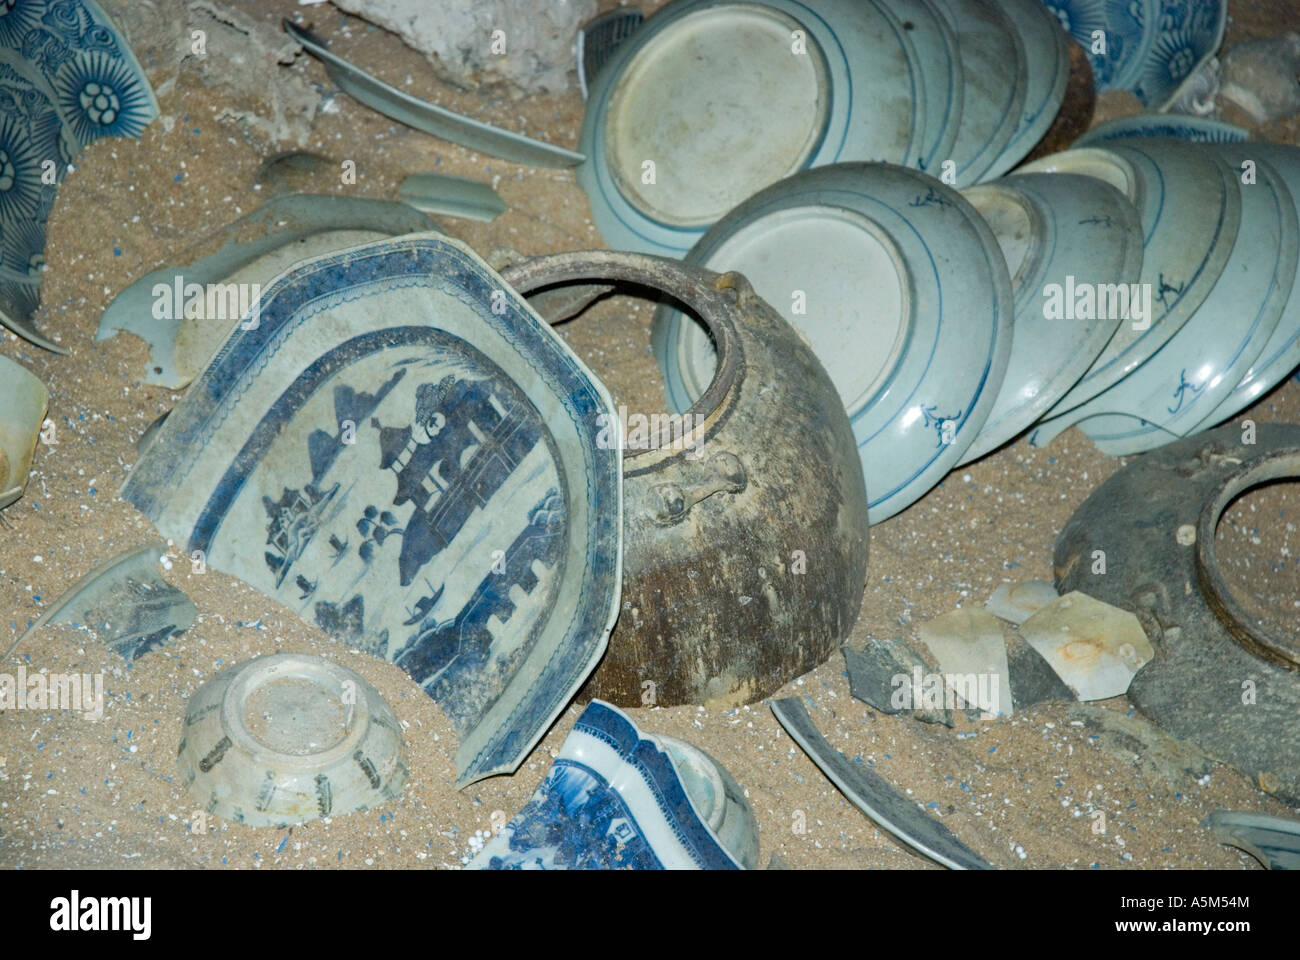 Blue china dishes recovered from a 17th Century Portuguese shipwreck on display in the Maritime Museum Malacca Malaysia Stock Photo